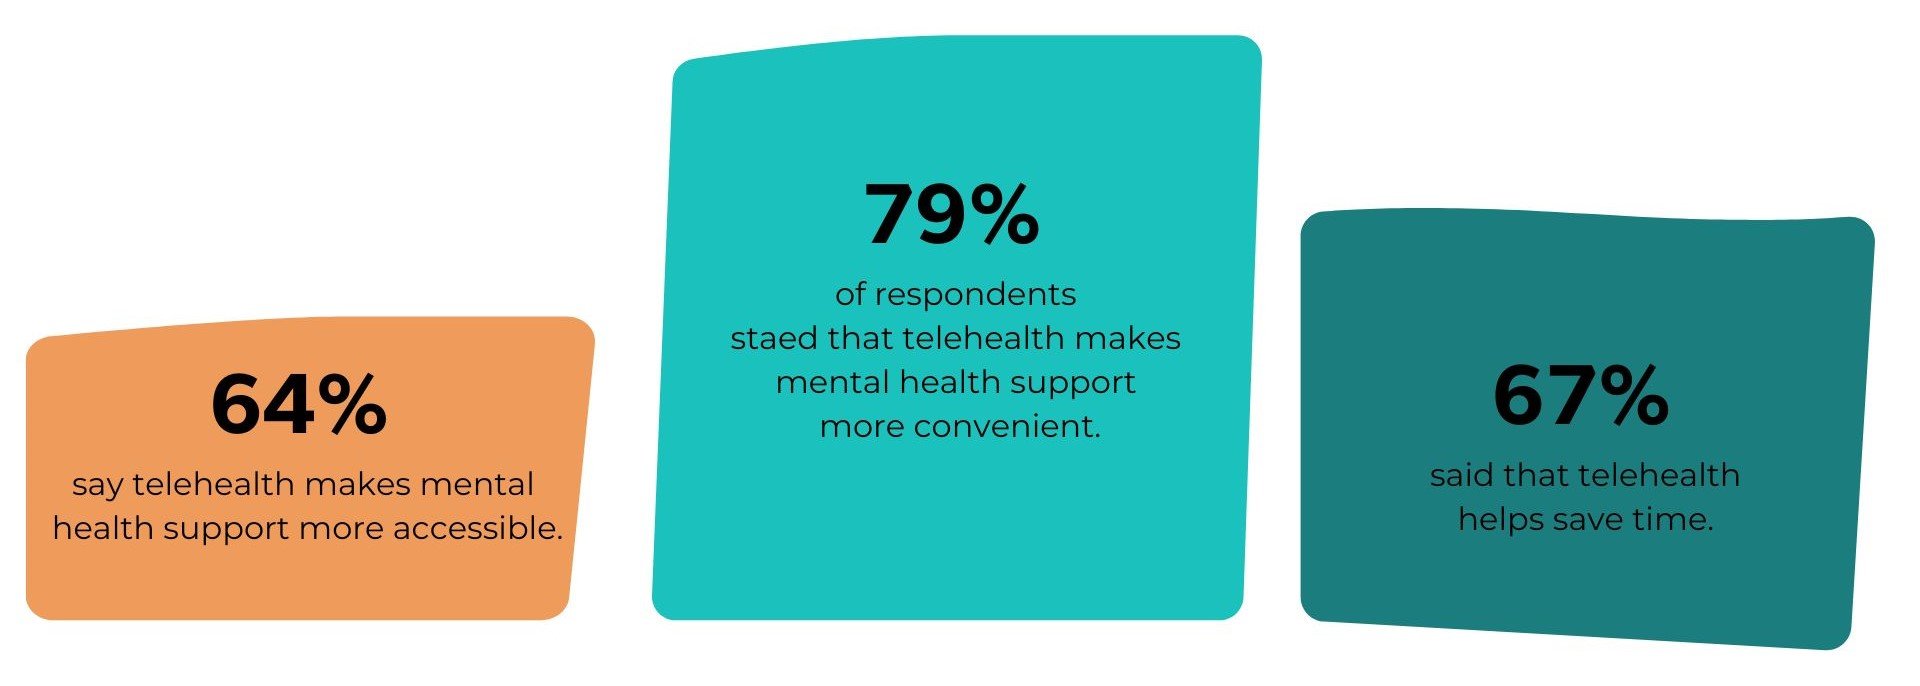 79% of respondents stating that telehealth makes mental health support more convenient, 67% said that it helps save time and 64% say it makes mental health support more accessible.-1